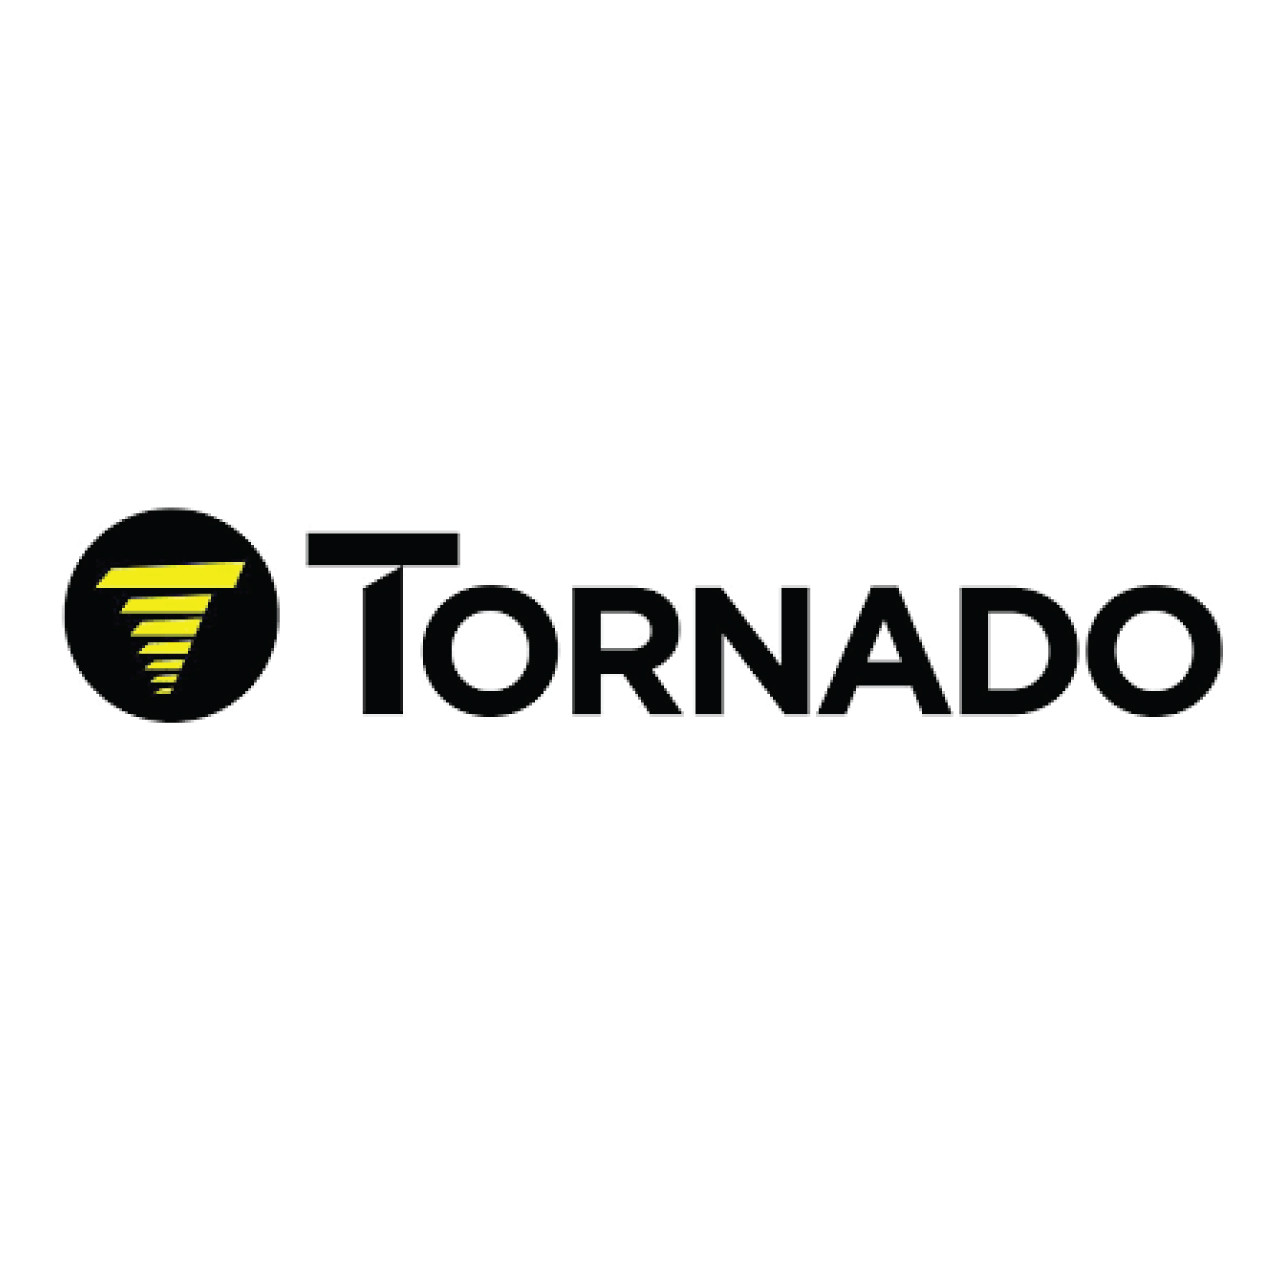 Tornado AA192.1 - Accessories,Stair Tool,Stainless Steel,800 PSI,6 Inch Head pic